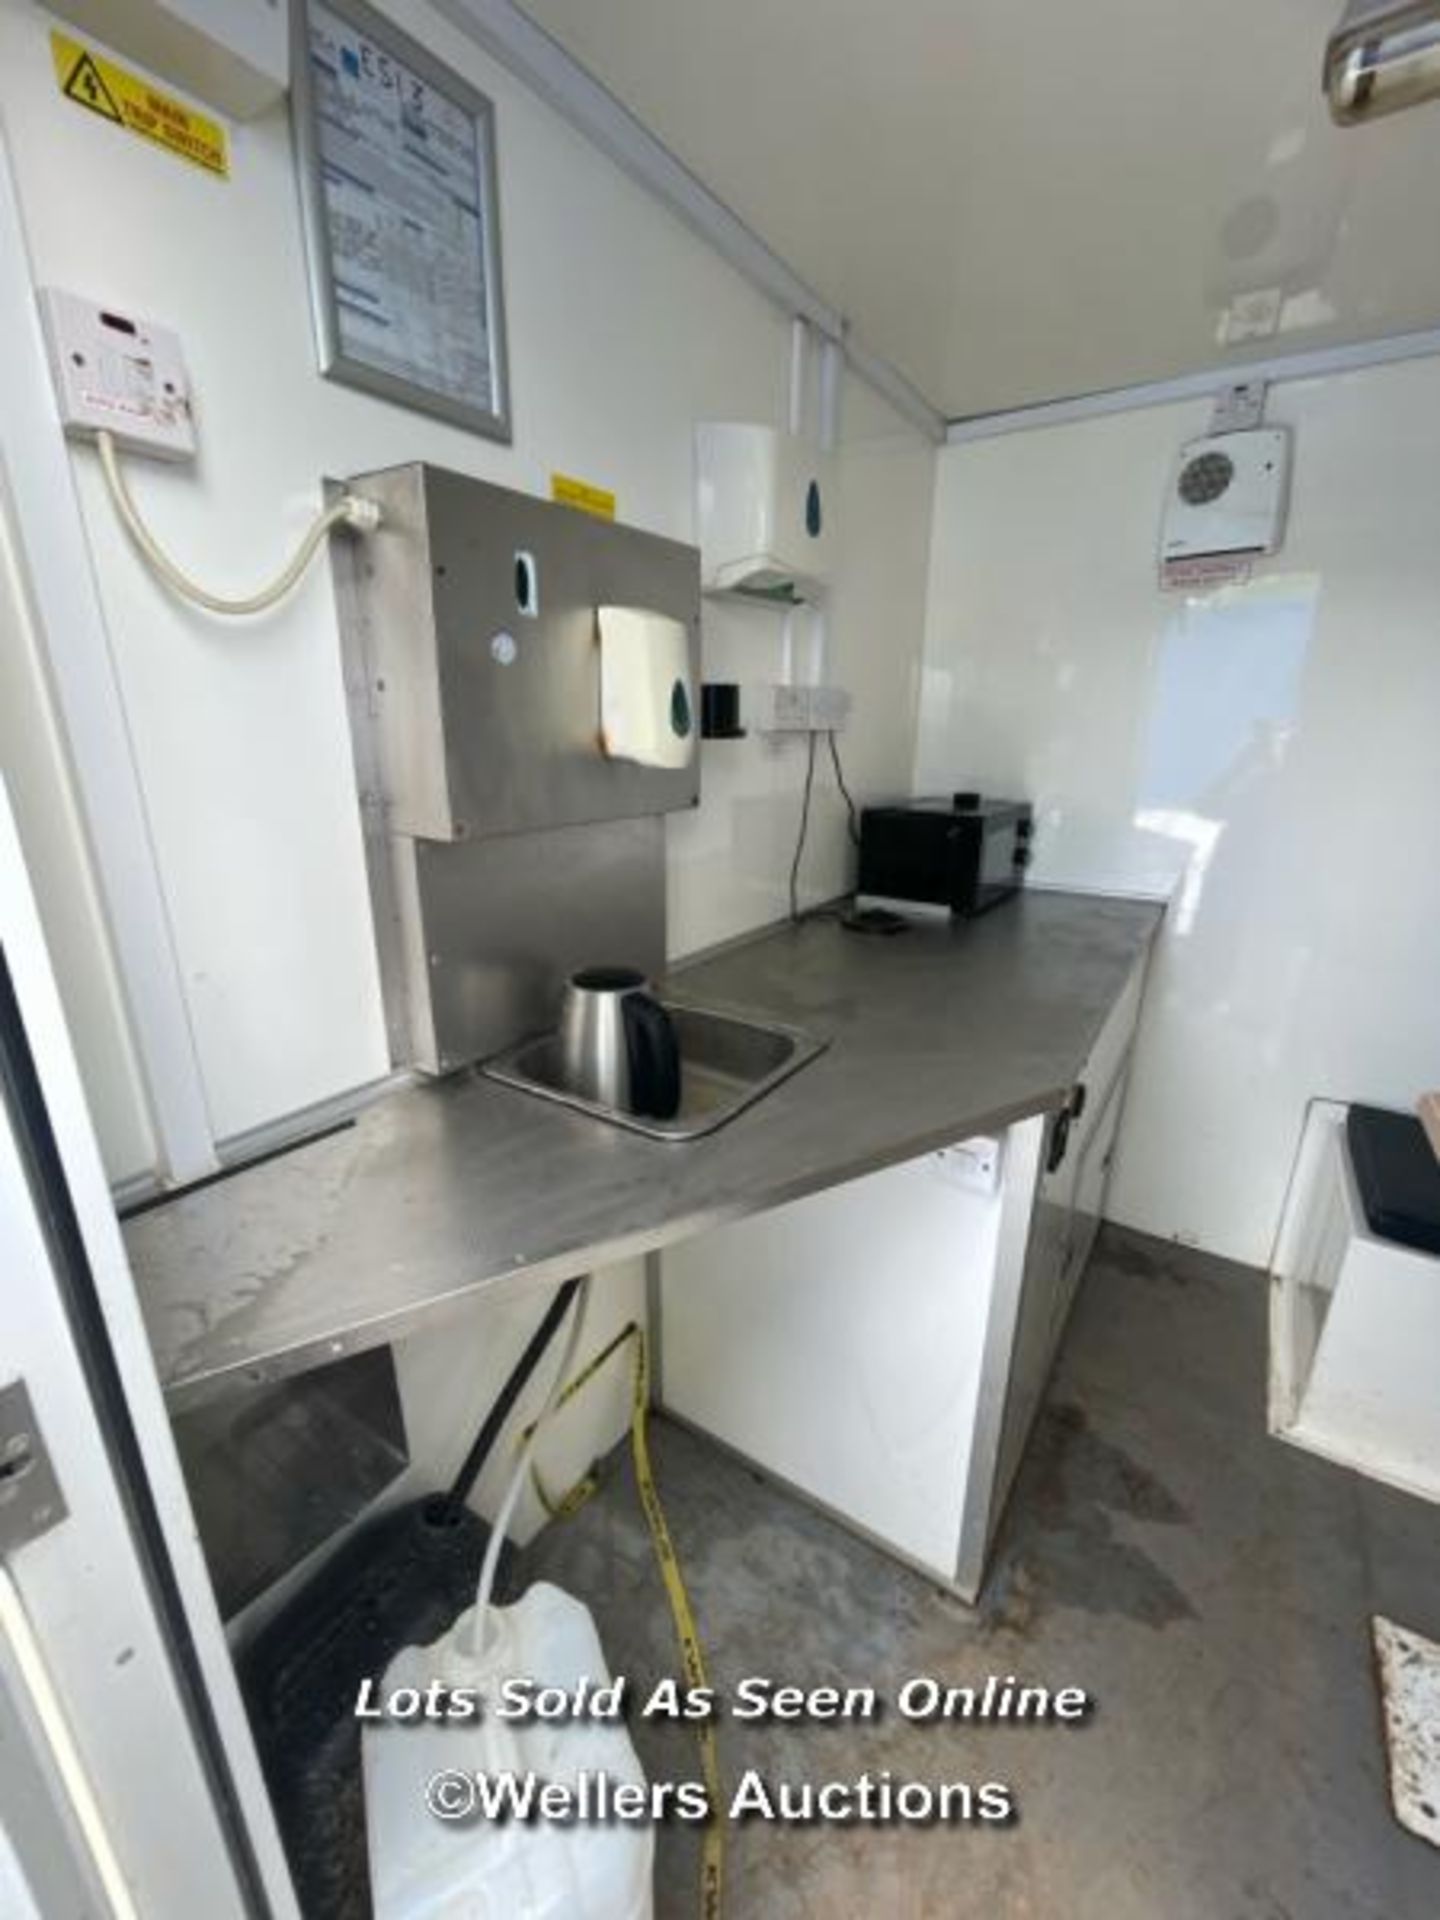 6 PERSON 12 X 7.5FT AJC EASY CABIN TOWABLE WELFARE UNIT, INCLUDES WASH BASIN, KETTLE, MICROWAVE, - Image 10 of 19